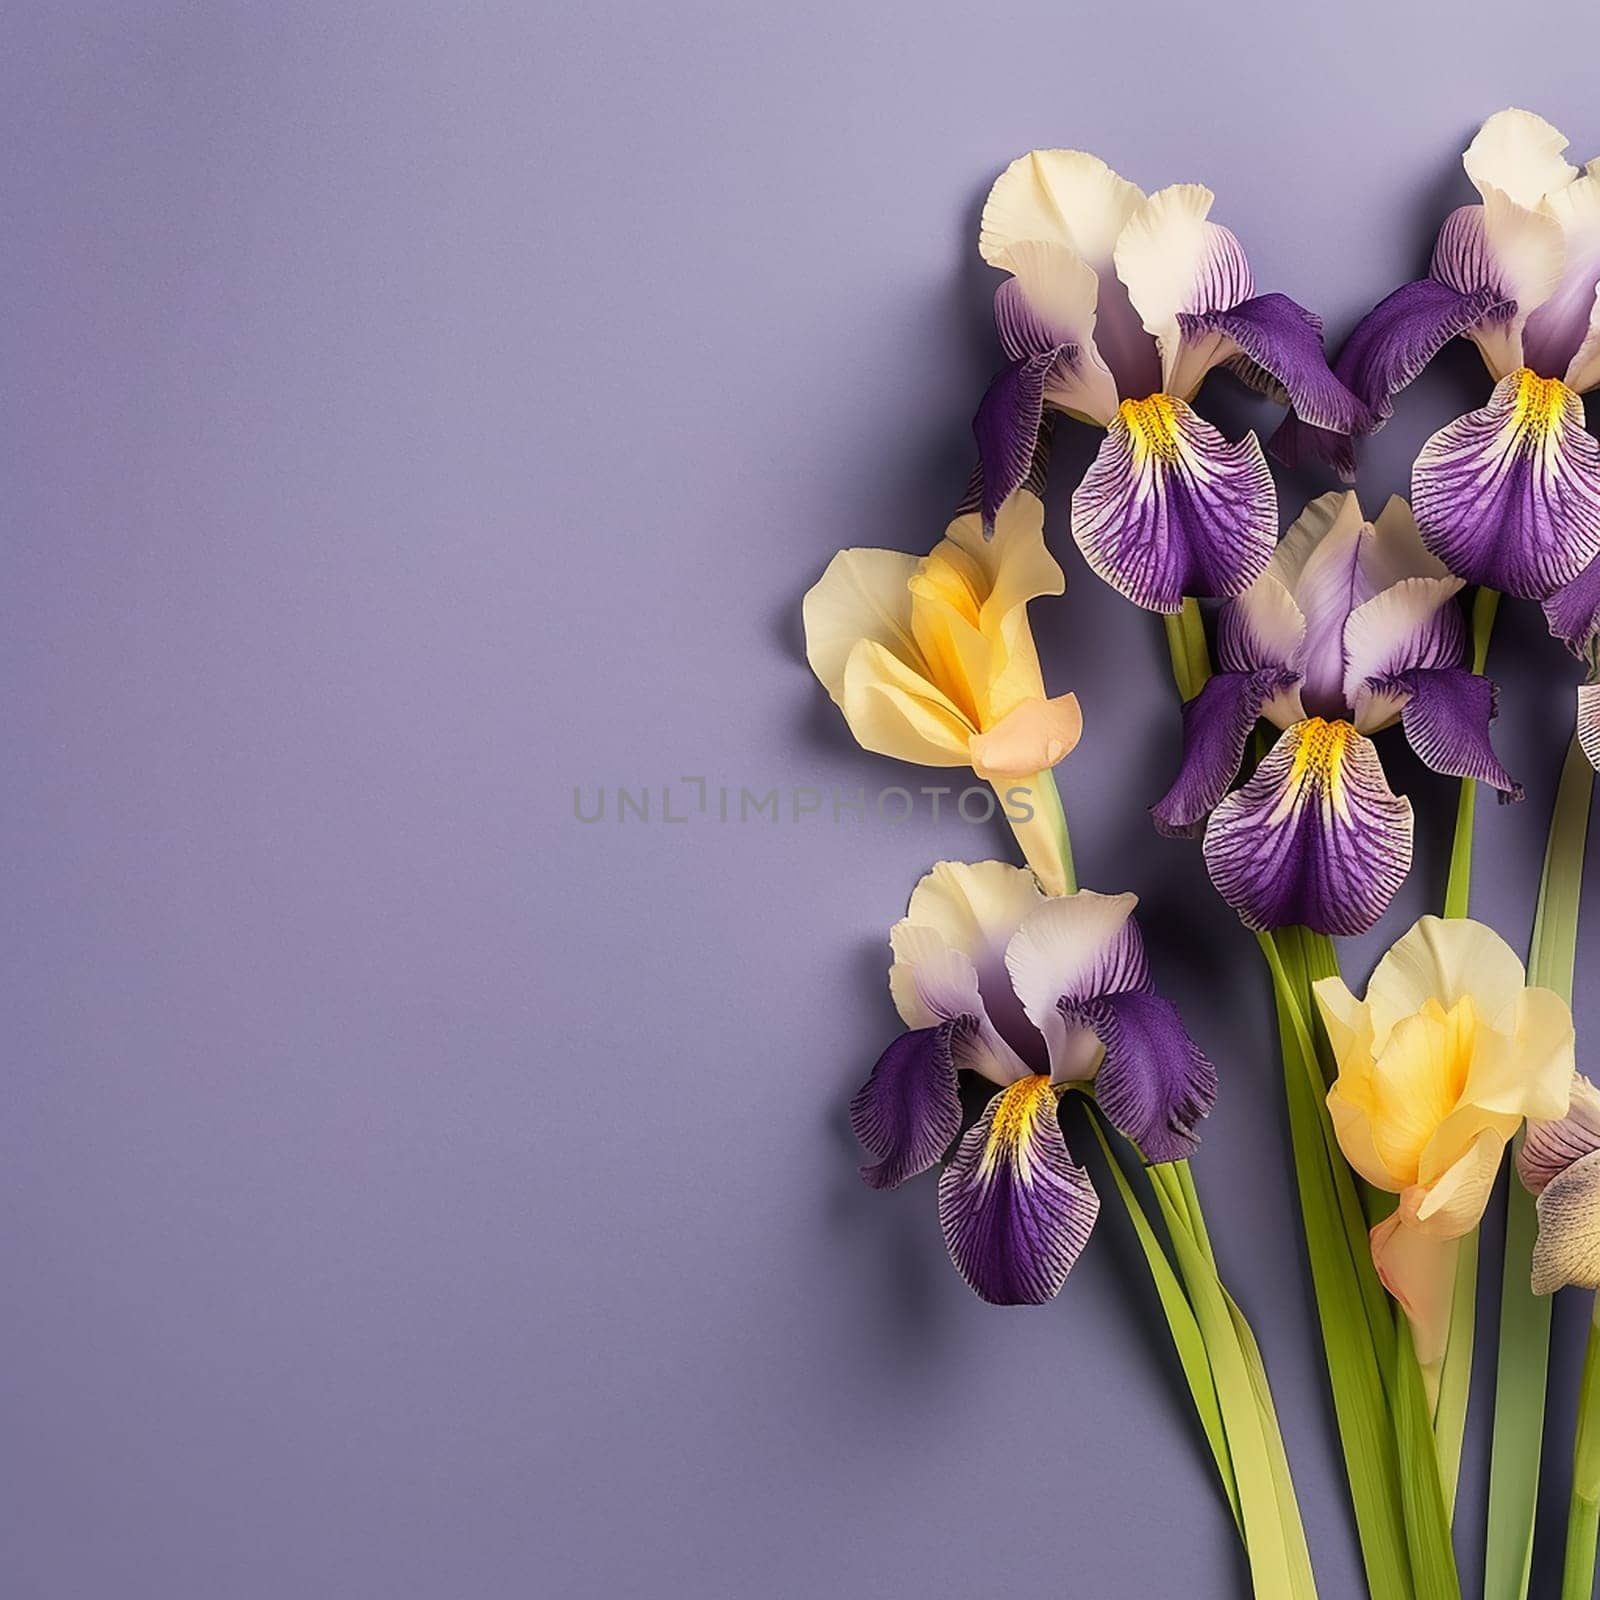 A collection of beautiful purple and yellow irises against a purple background. by Hype2art